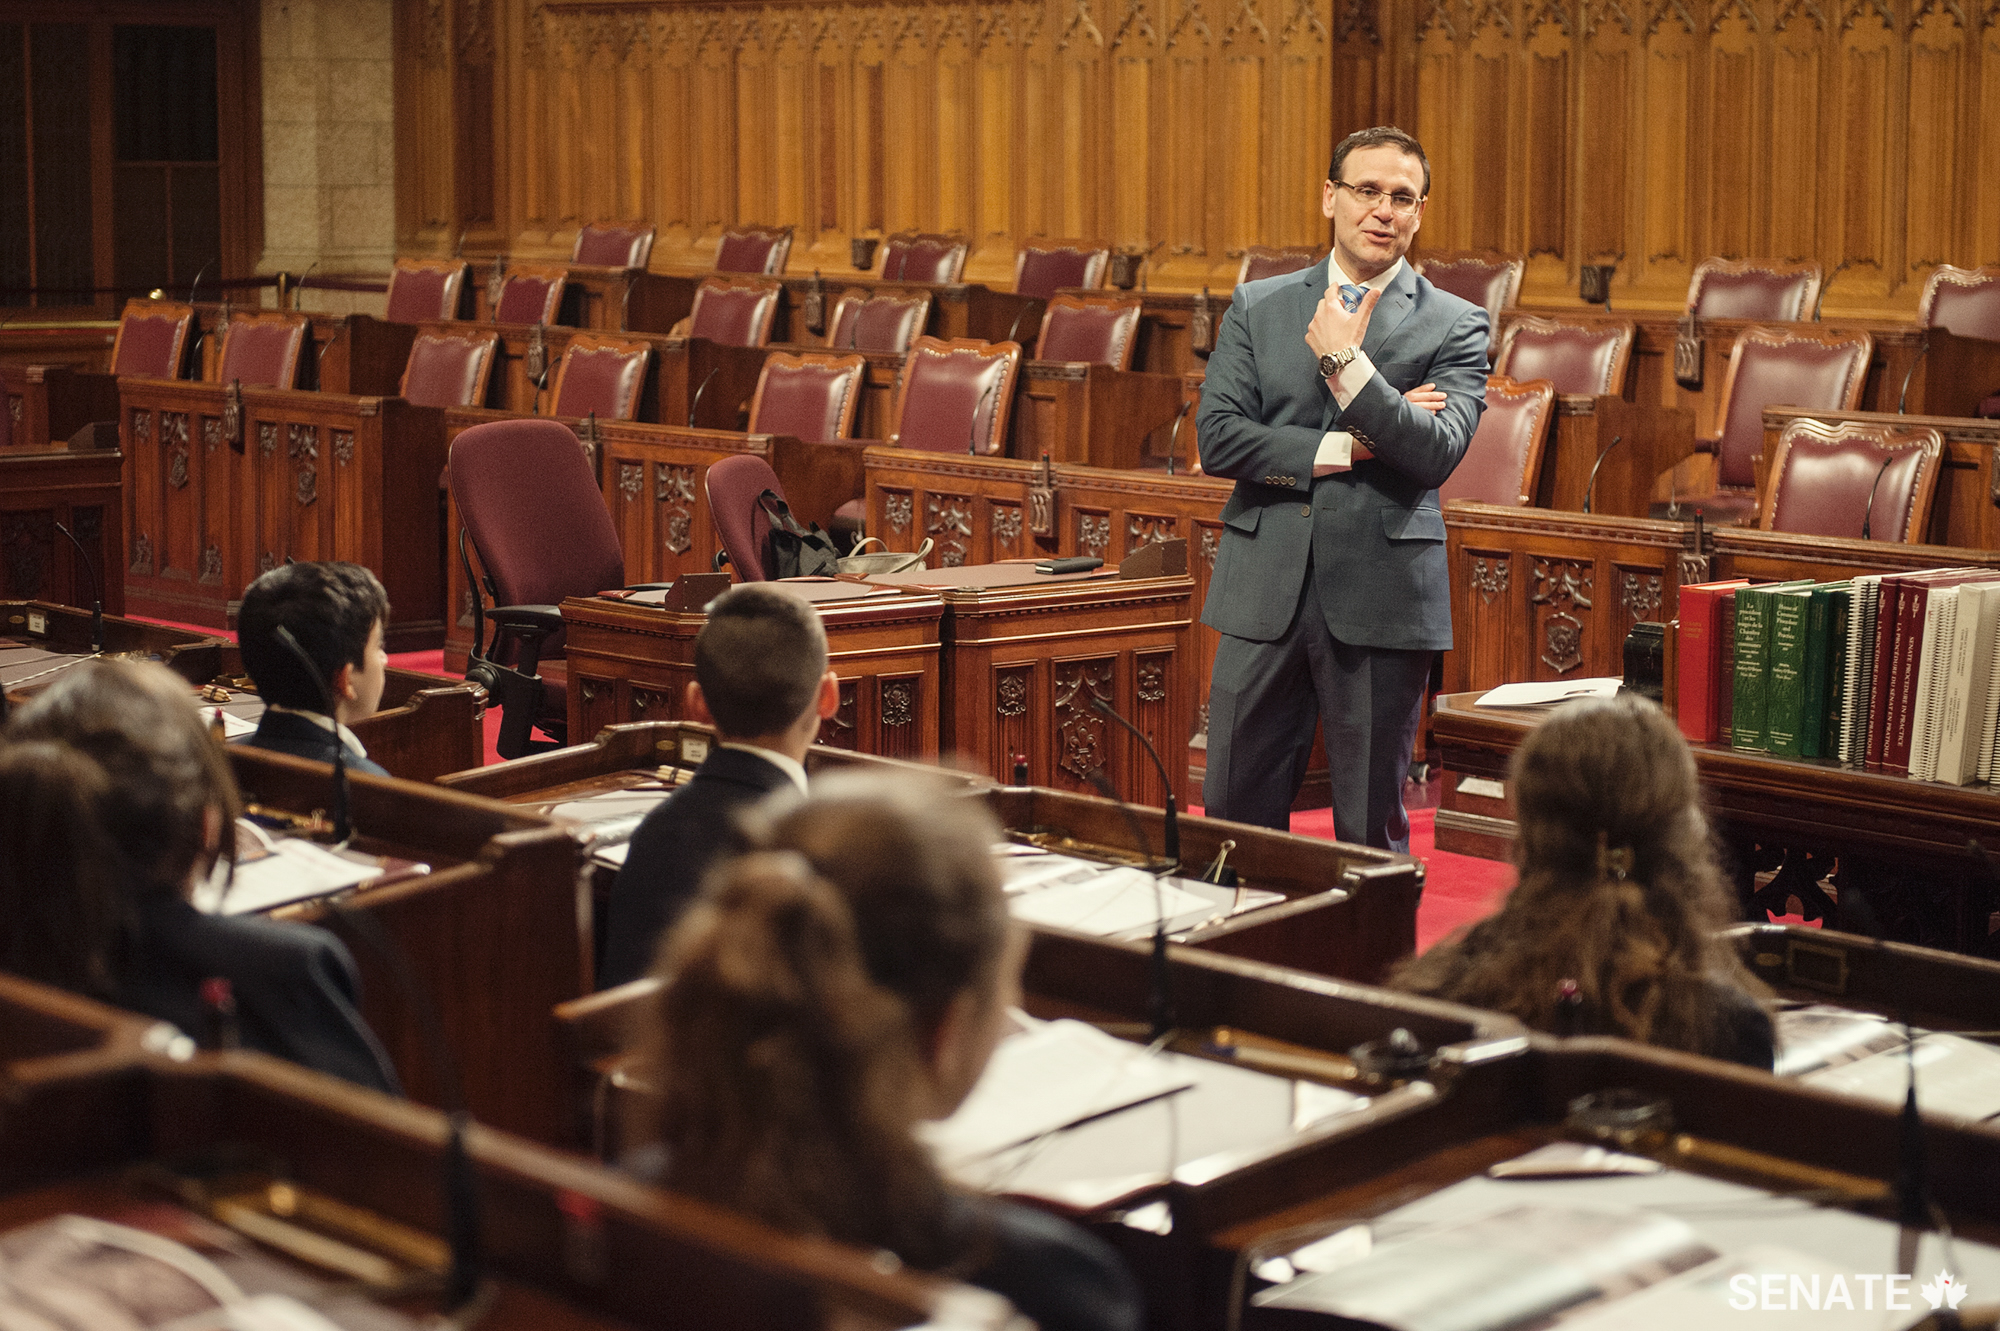 Senator Leo Housakos welcomes students to the Senate and explains some of the work that goes on in the chamber.